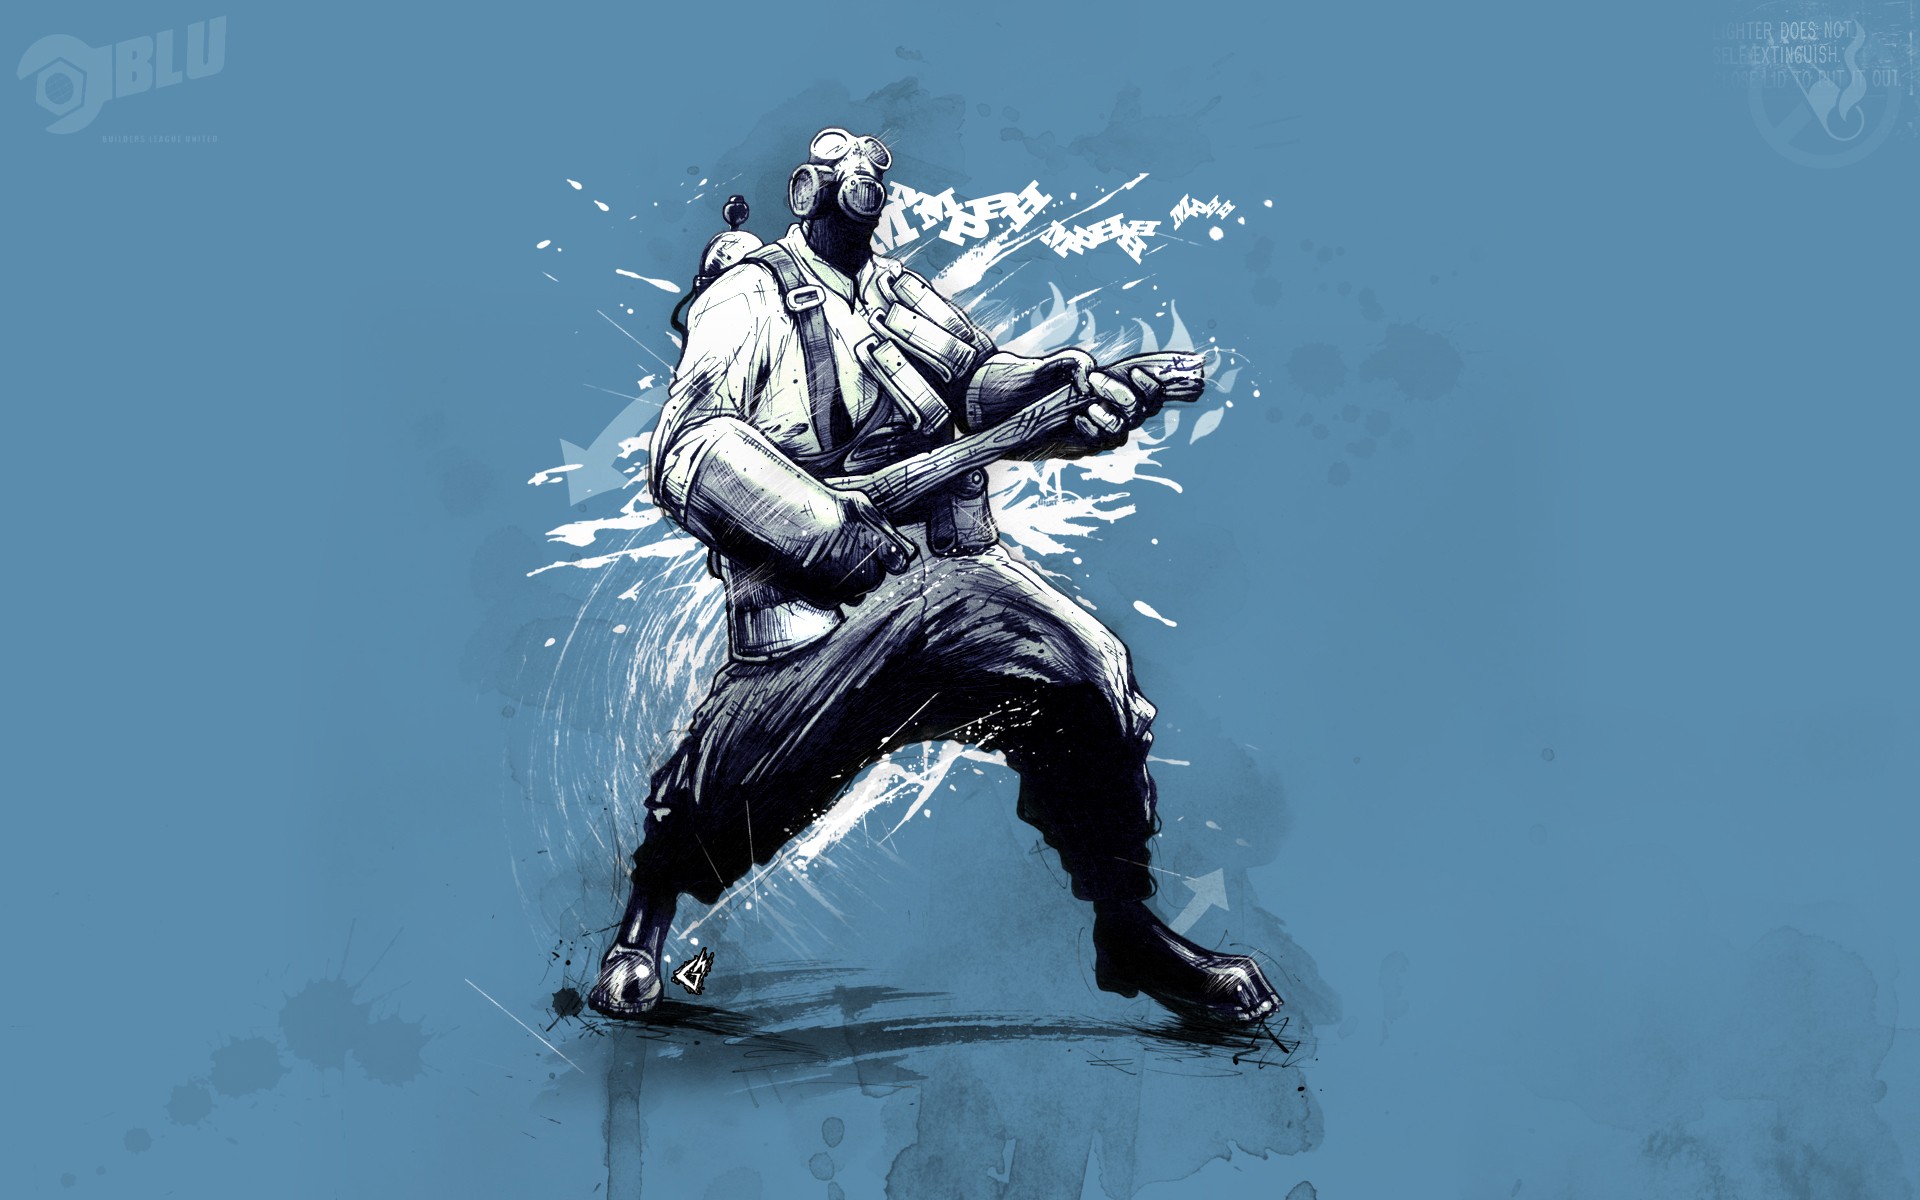 General 1920x1200 Team Fortress 2 video games blue background video game art blue PC gaming